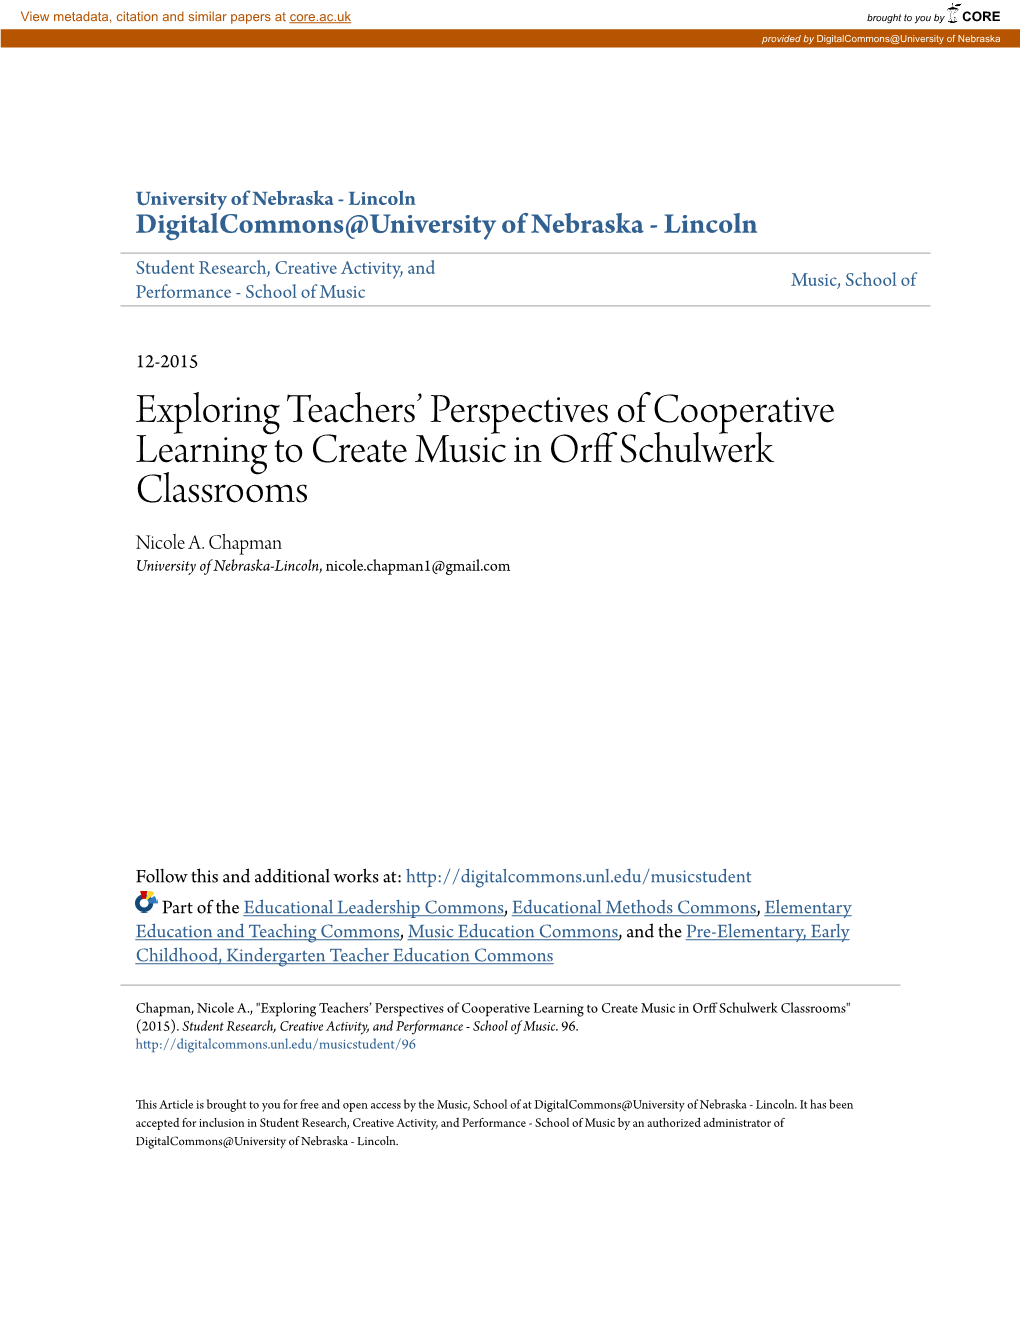 Exploring Teachers' Perspectives of Cooperative Learning to Create